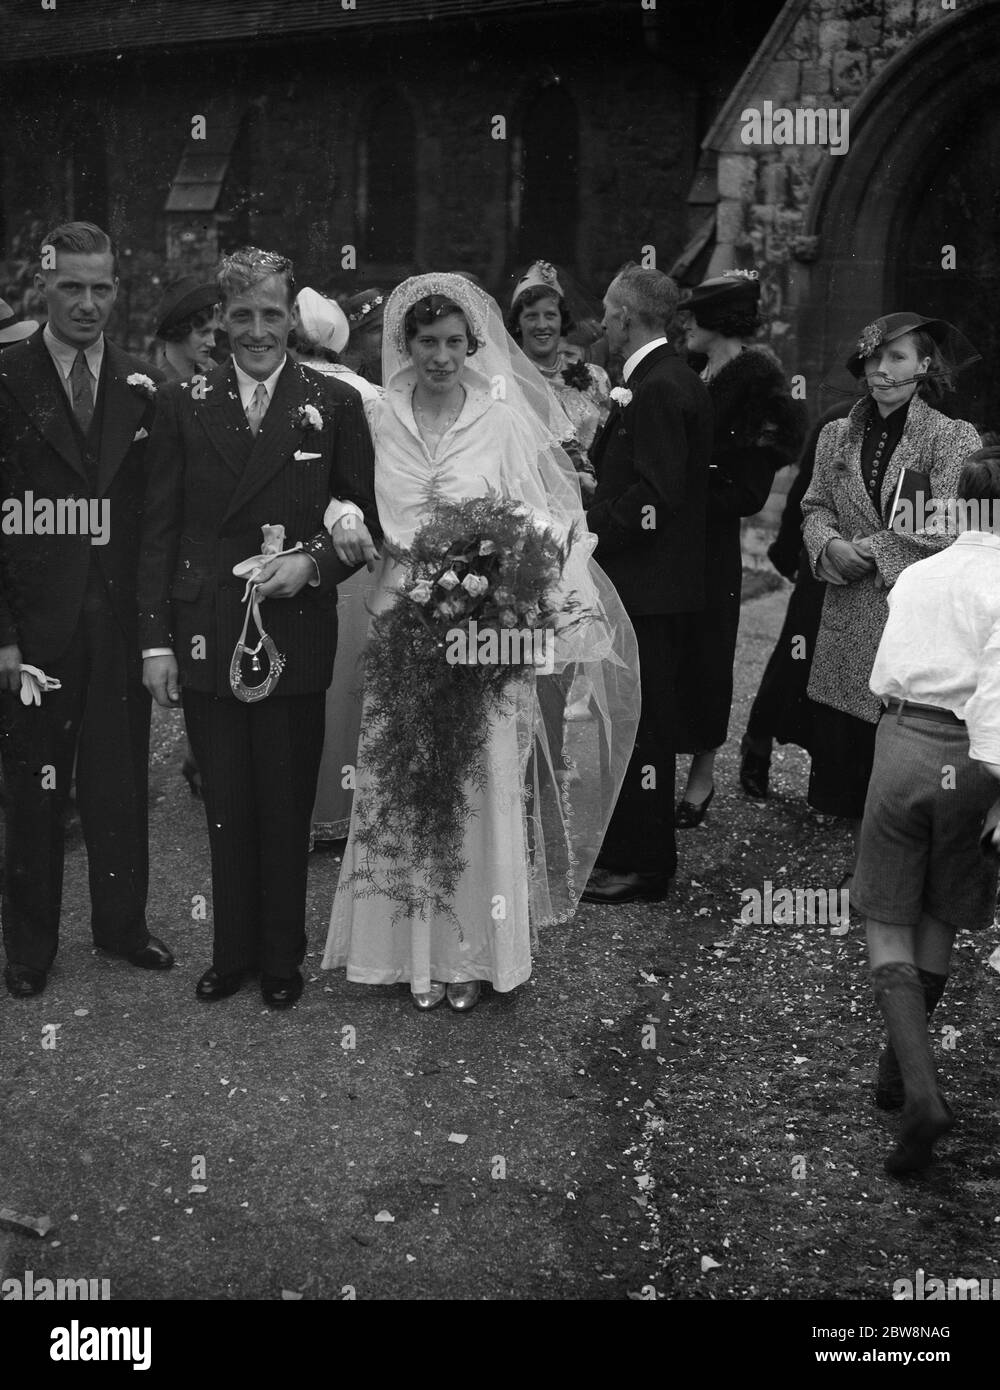 The wedding of Motor cyclist J Walby and M G Edwards . 1938 Stock Photo